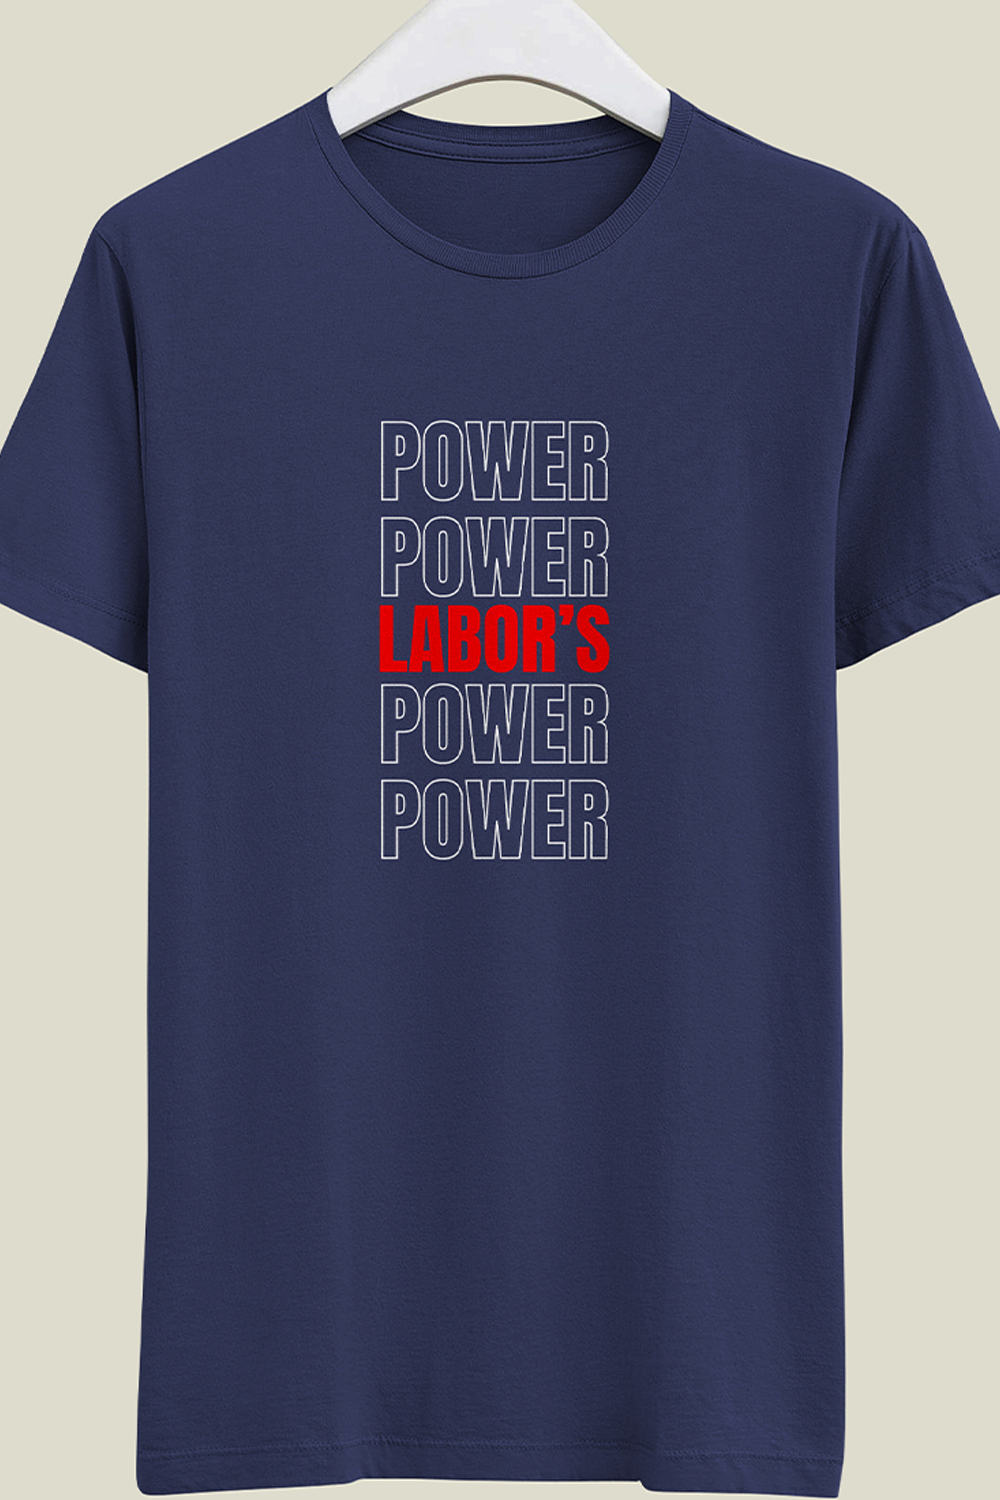 Labor's Power - Laybor Day Typography T-shirt Design pinterest preview image.